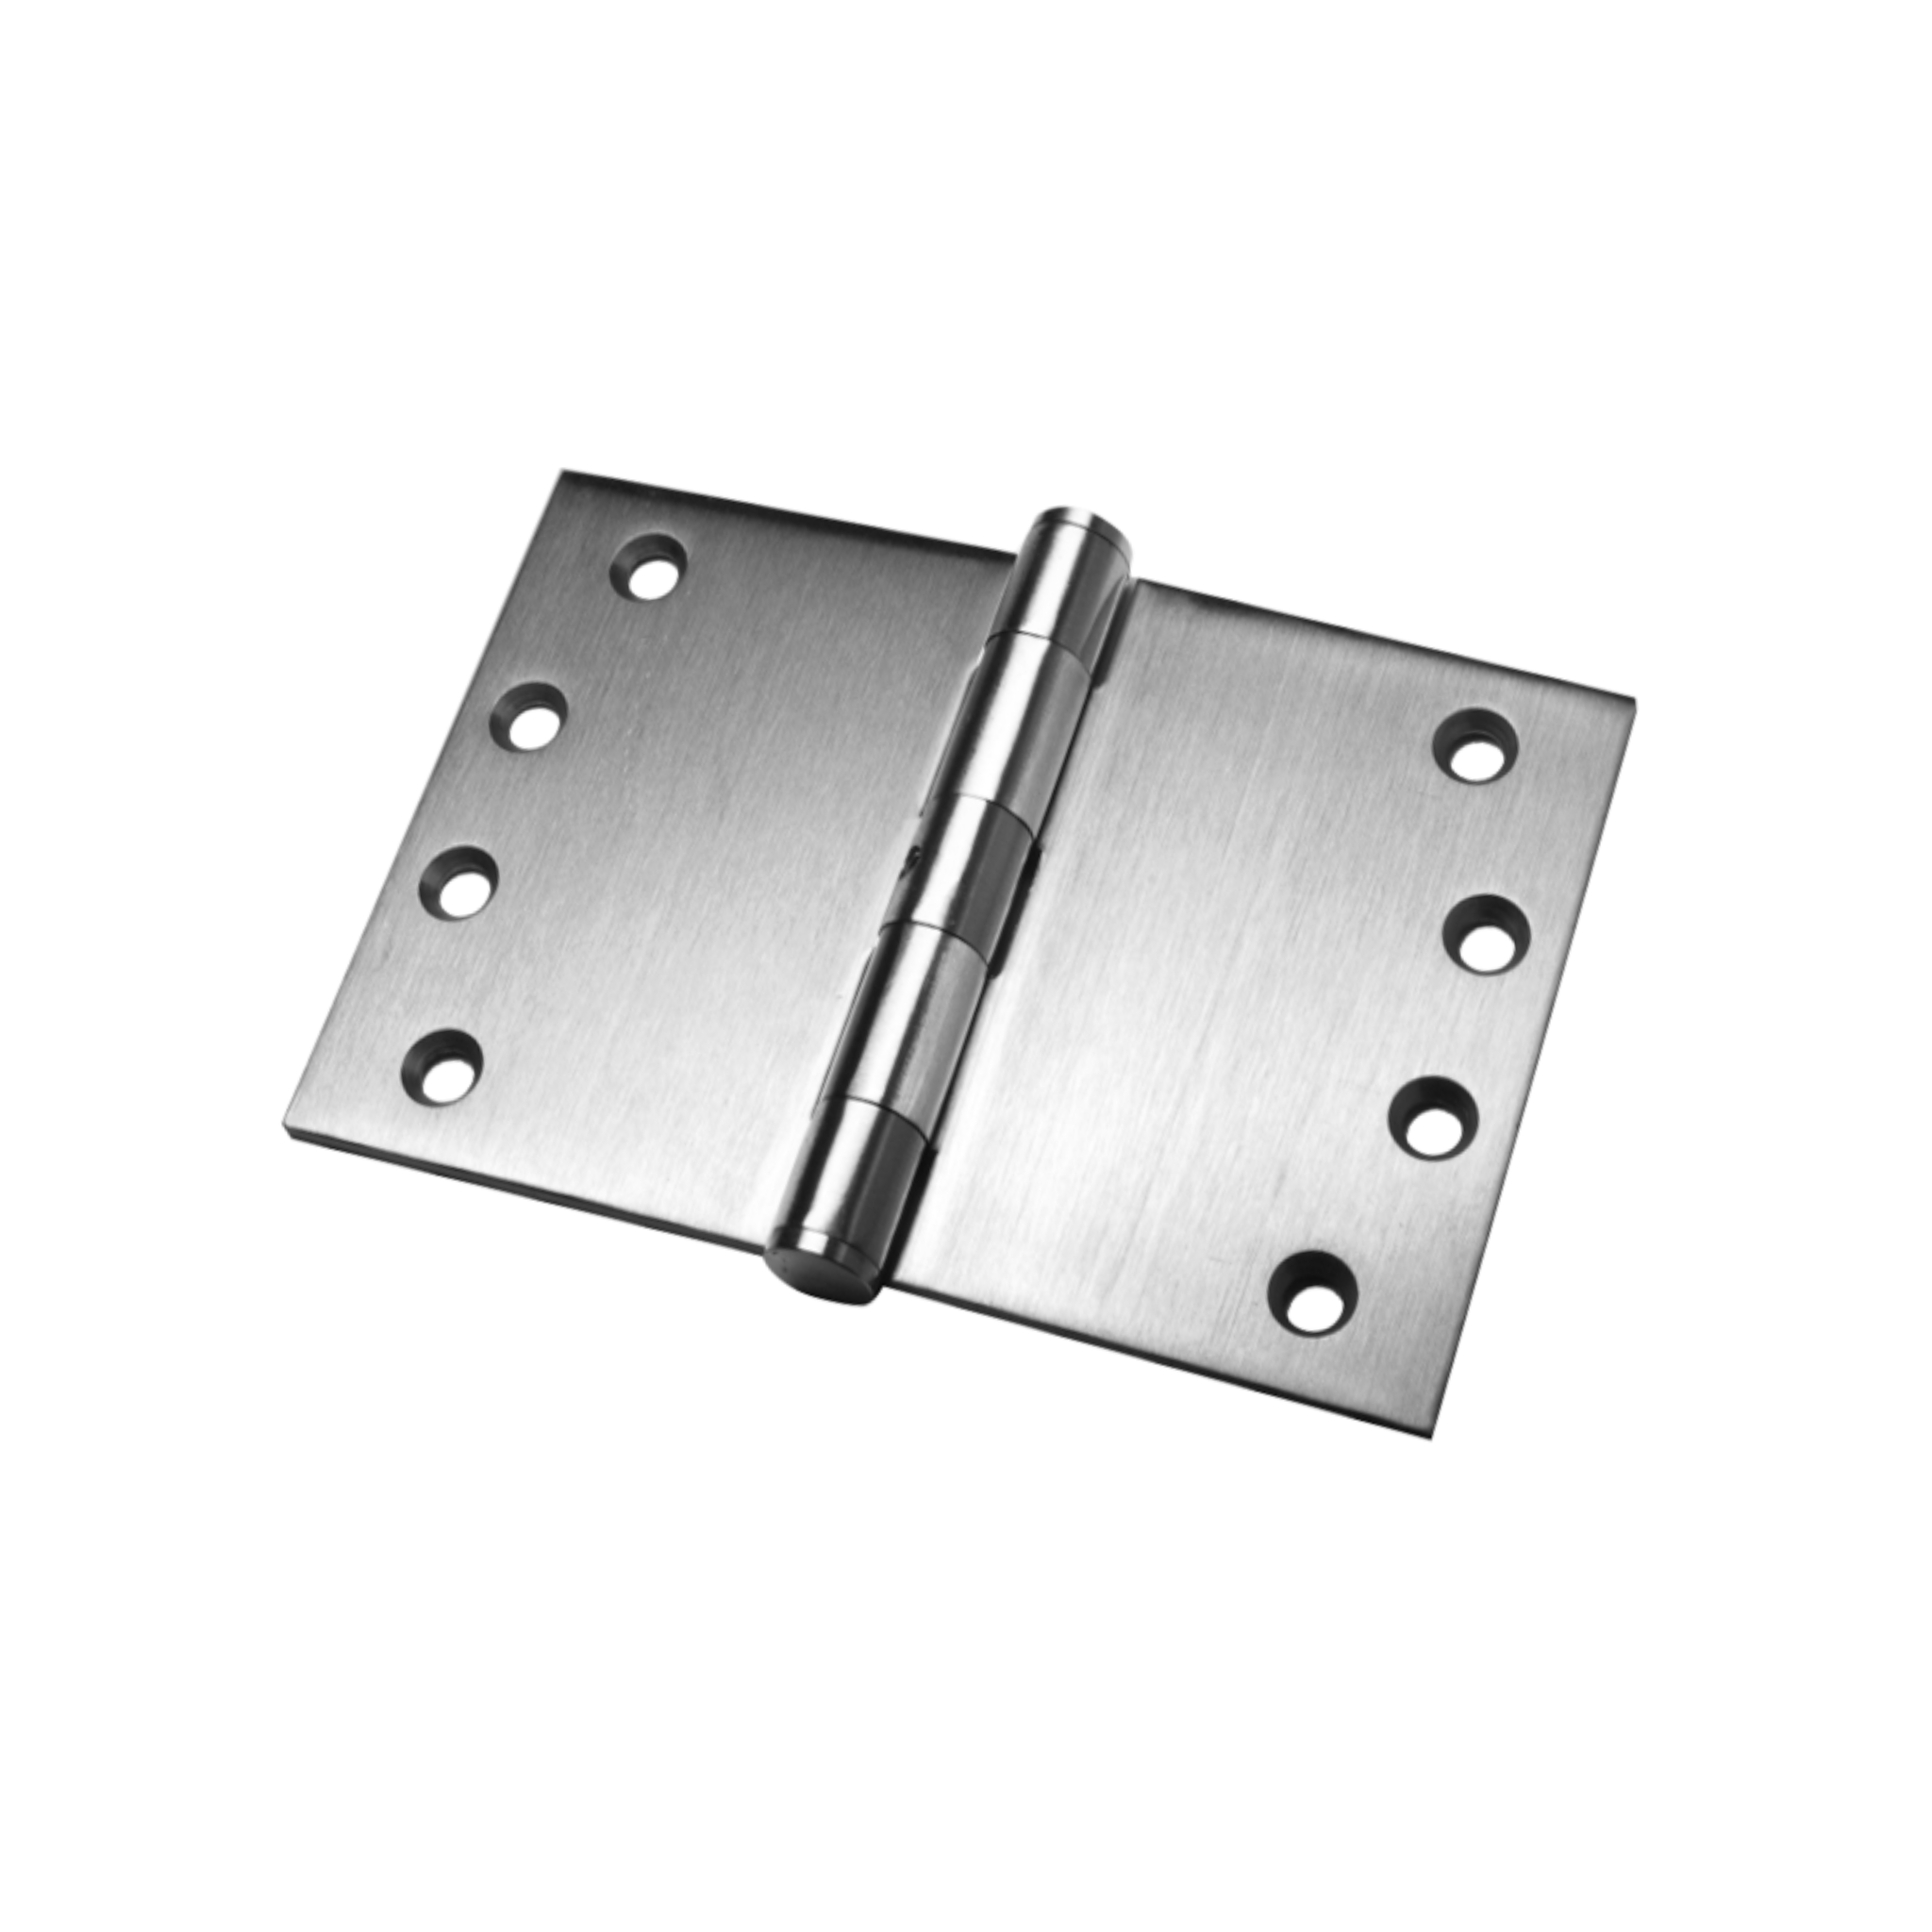 QS4412/1 150, Projection Hinge, 2 x Hinges (1 Pair), 100mm (h) x 150mm (w) x 3mm (t), Stainless Steel, QS